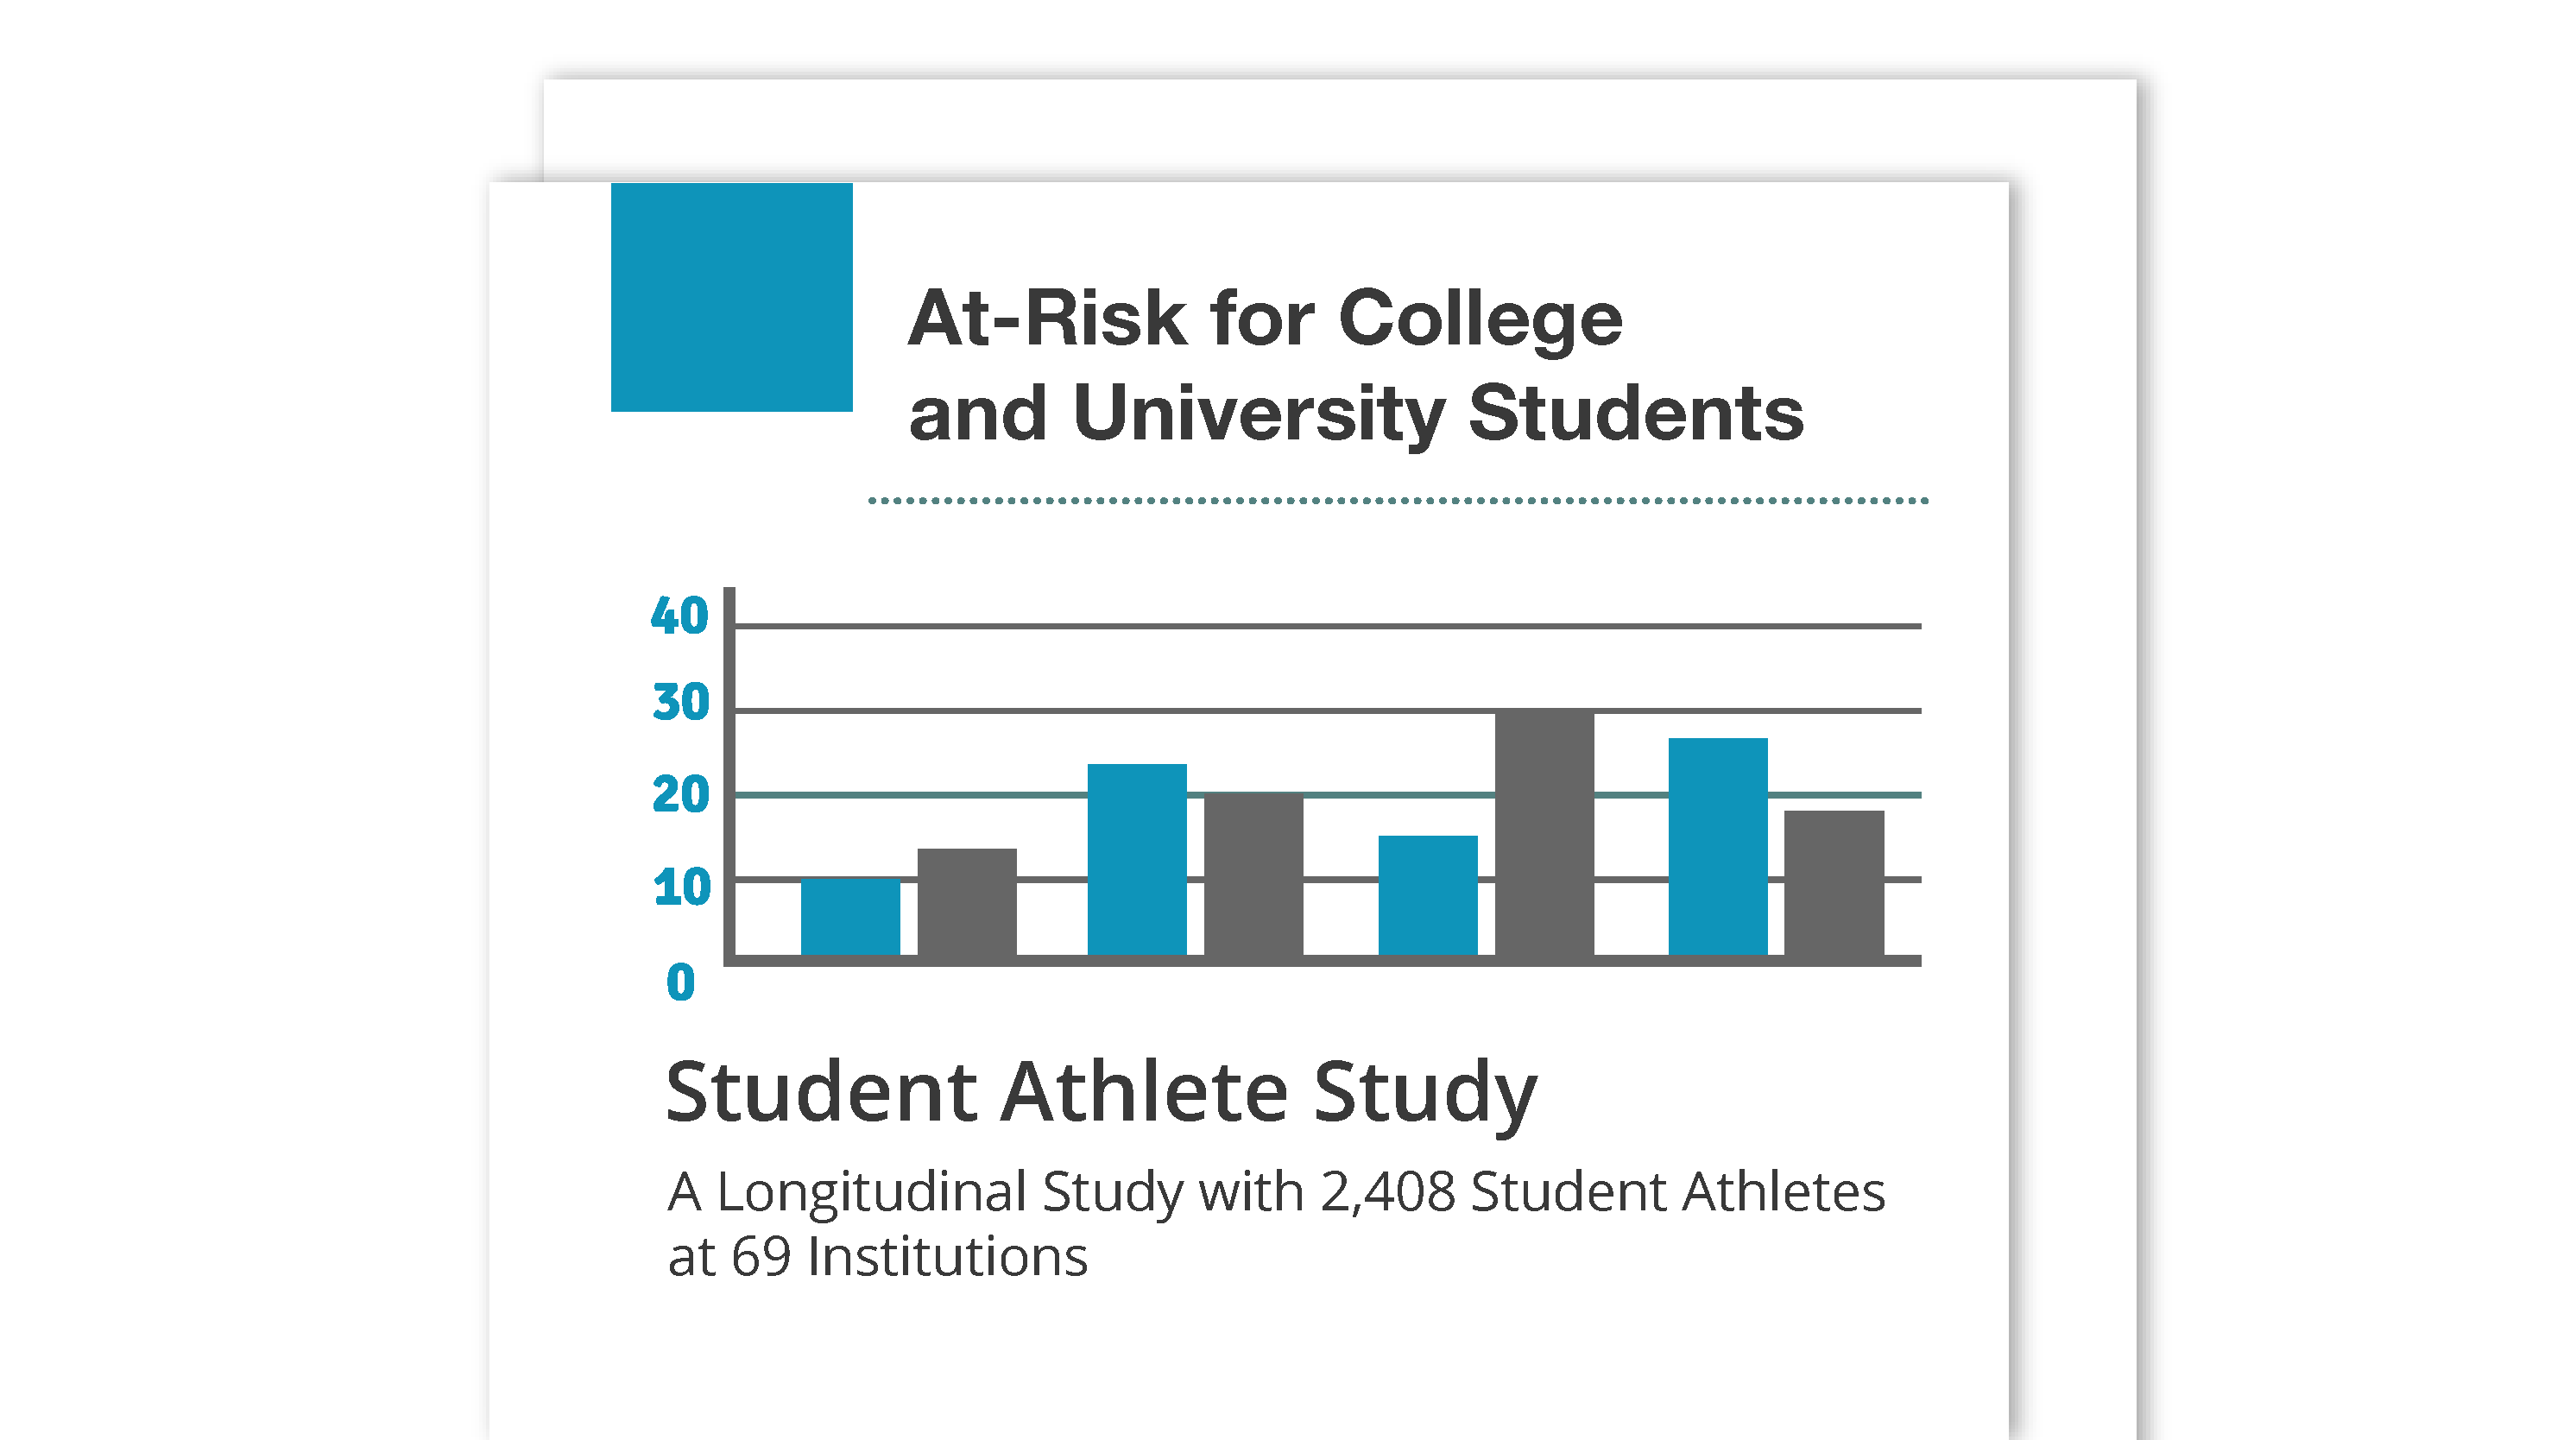 At-Risk for Students: Student Athletes Study